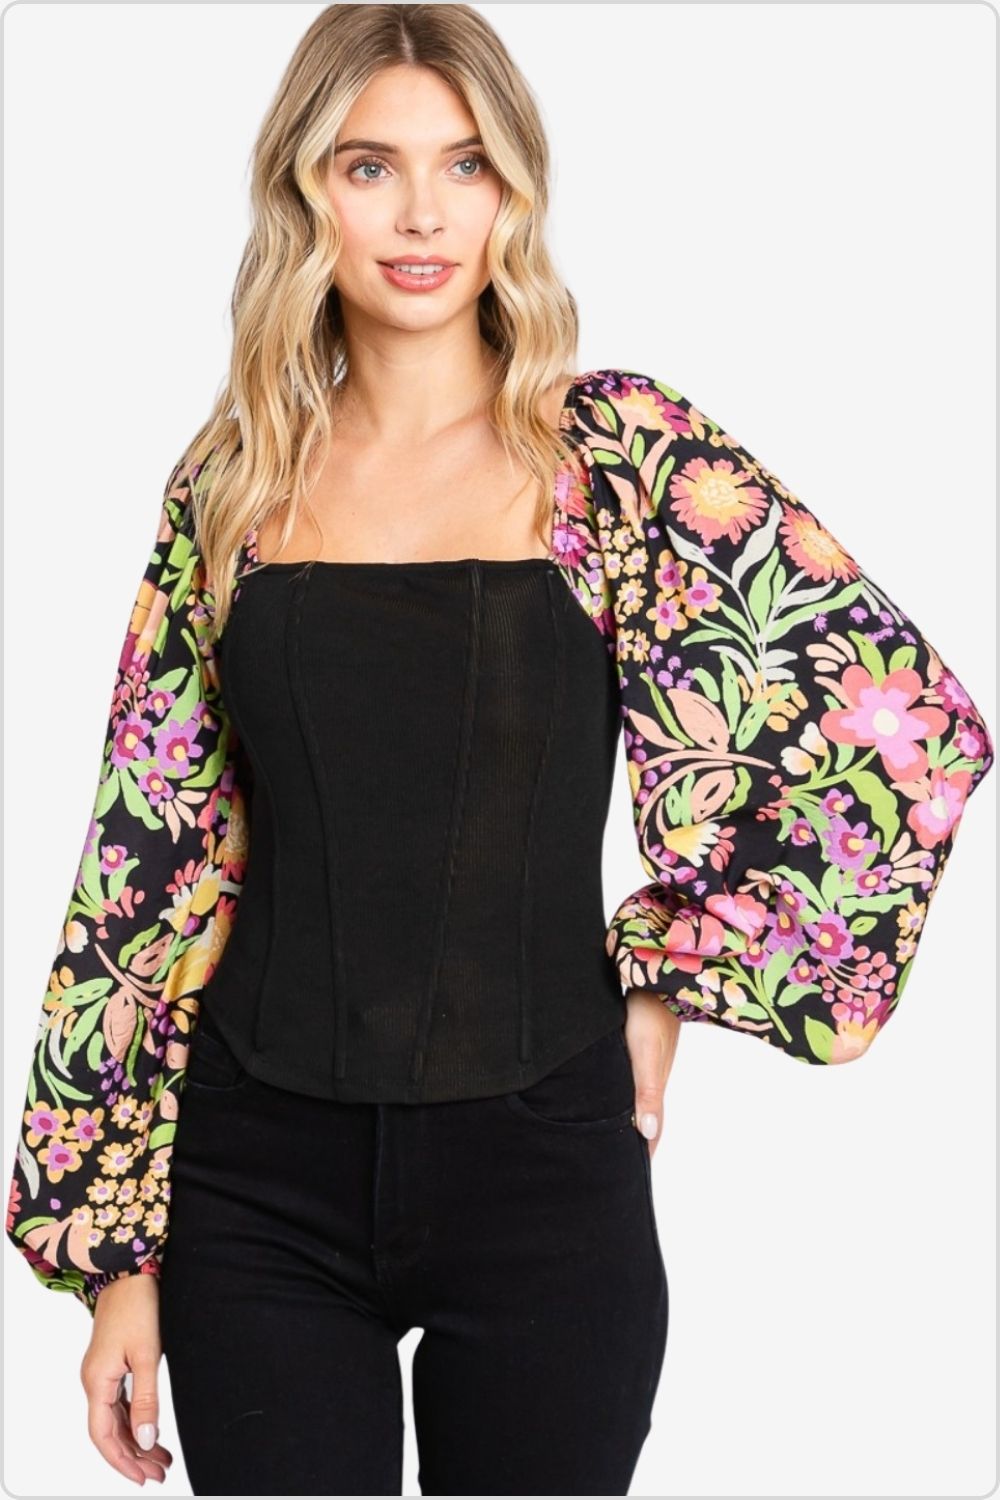 Woman in black corset top with vibrant floral balloon sleeves